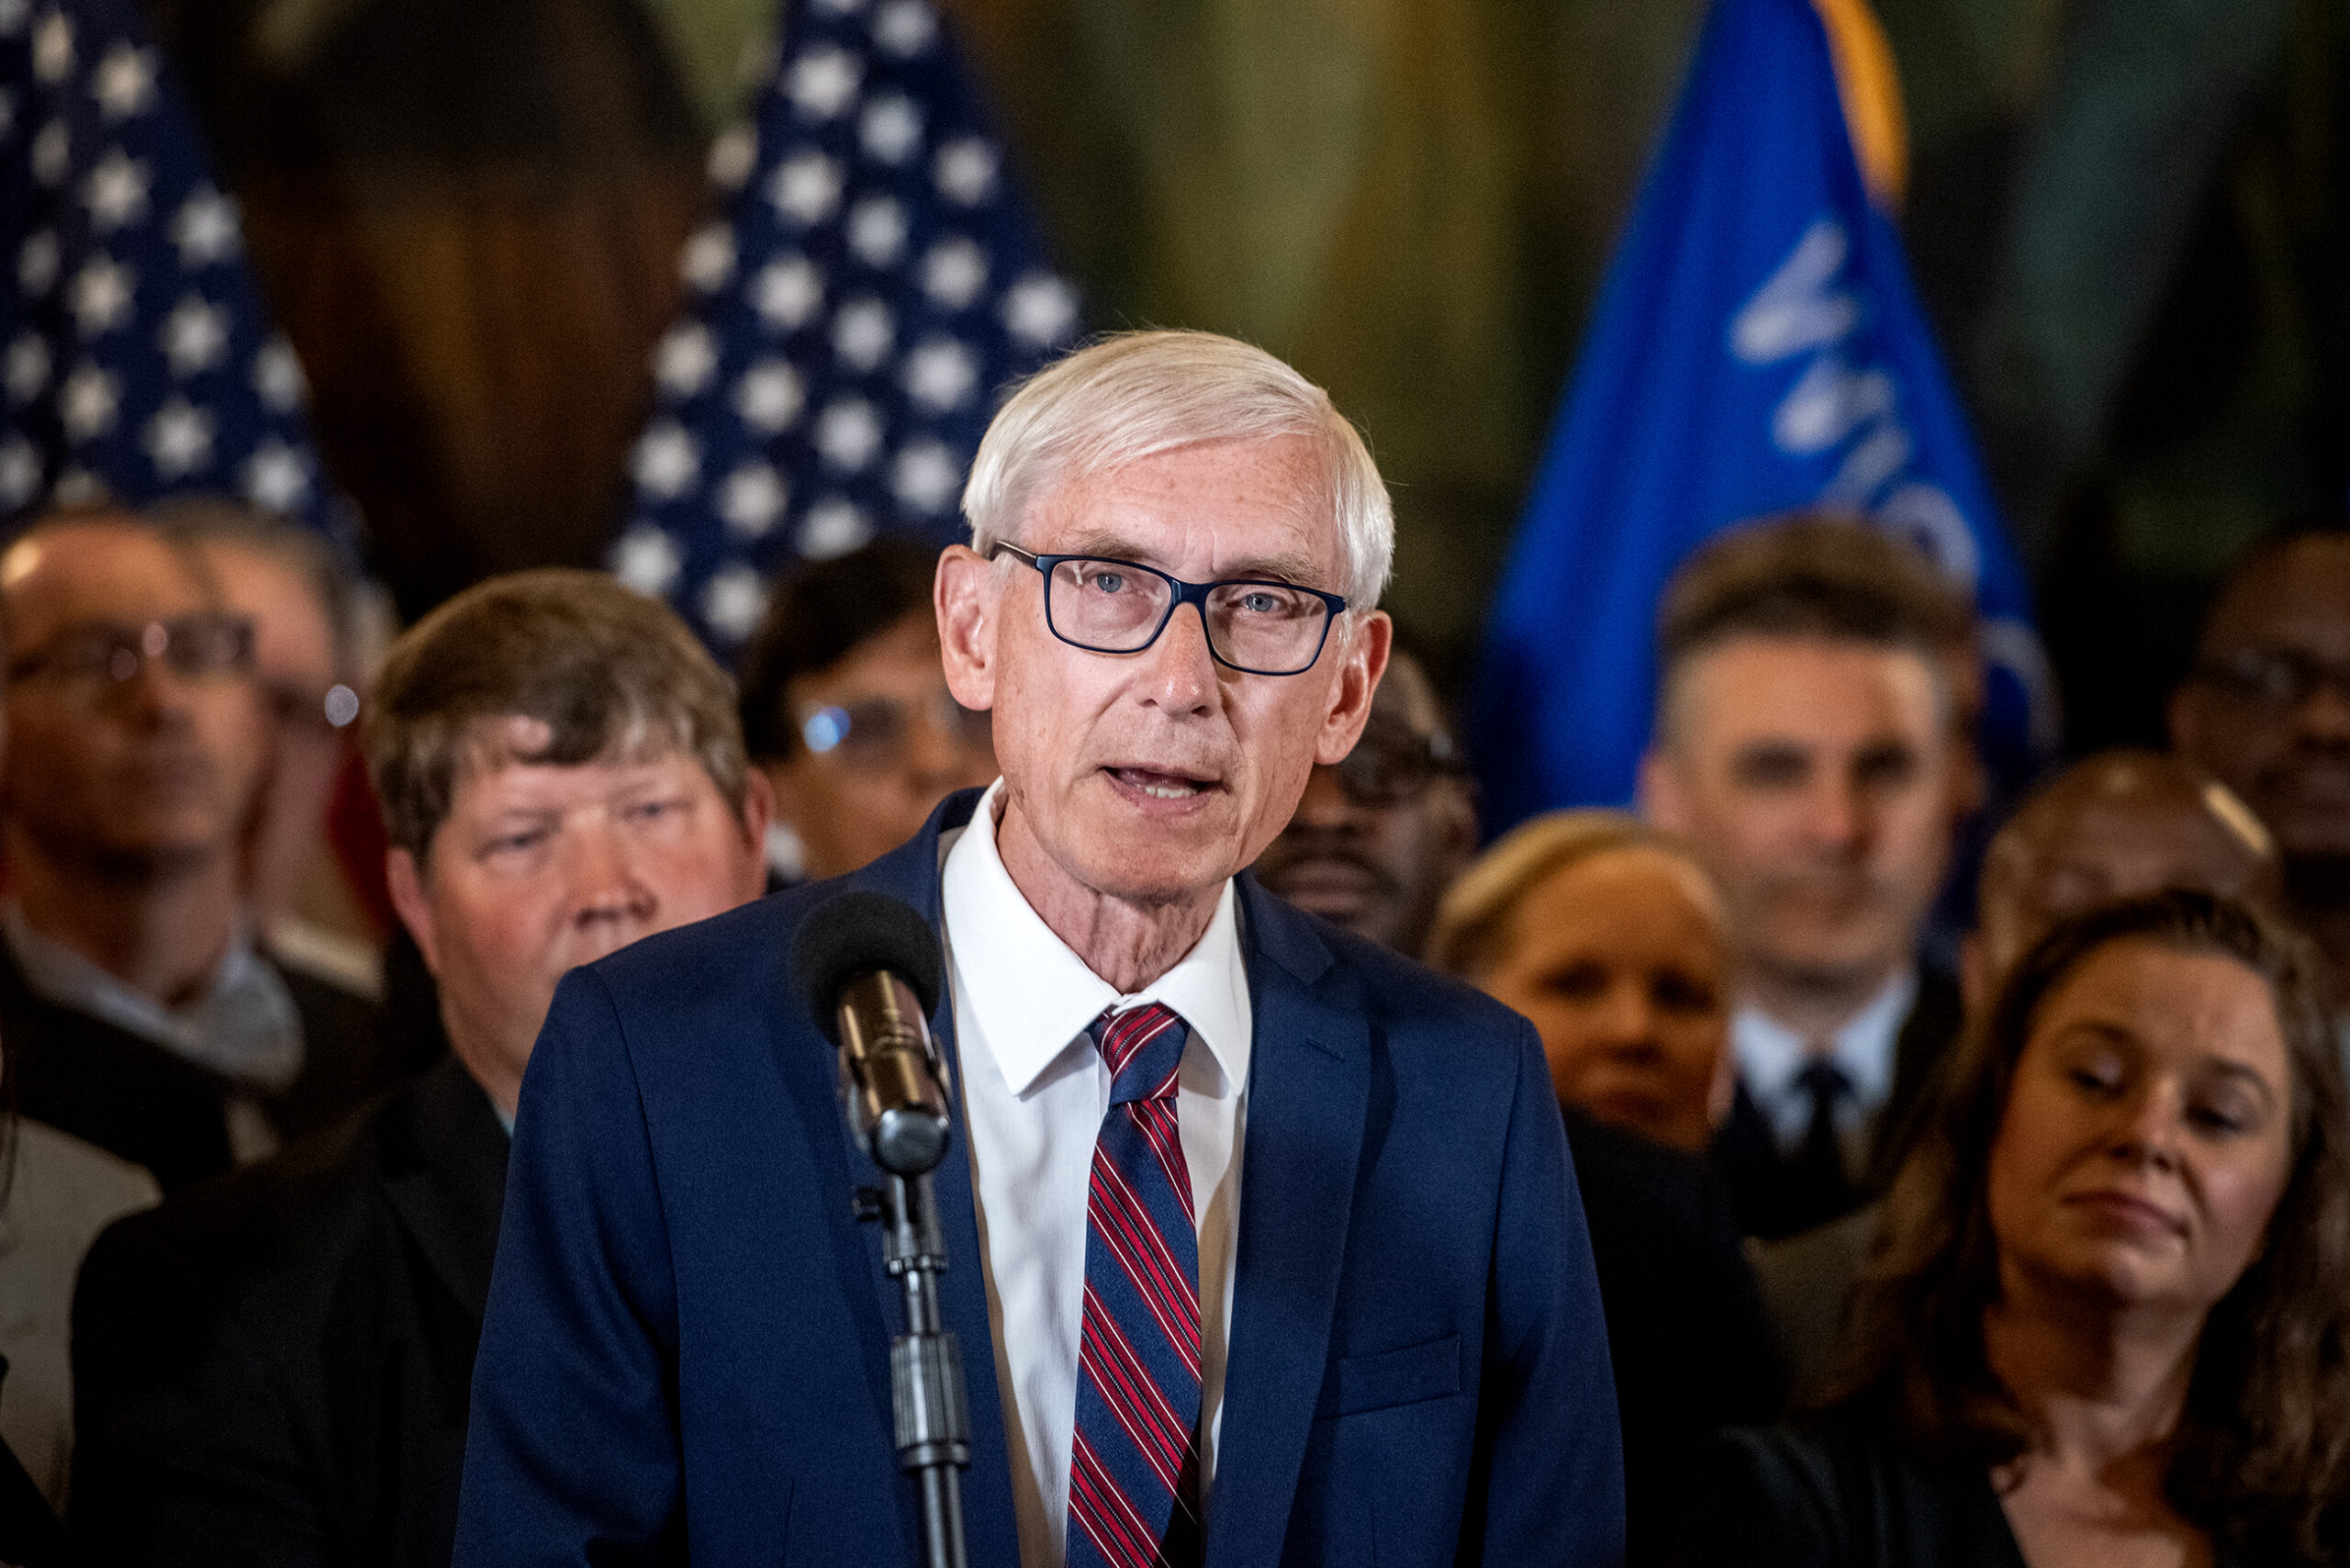 Gov. Tony Evers calls for legal consequence for false electors